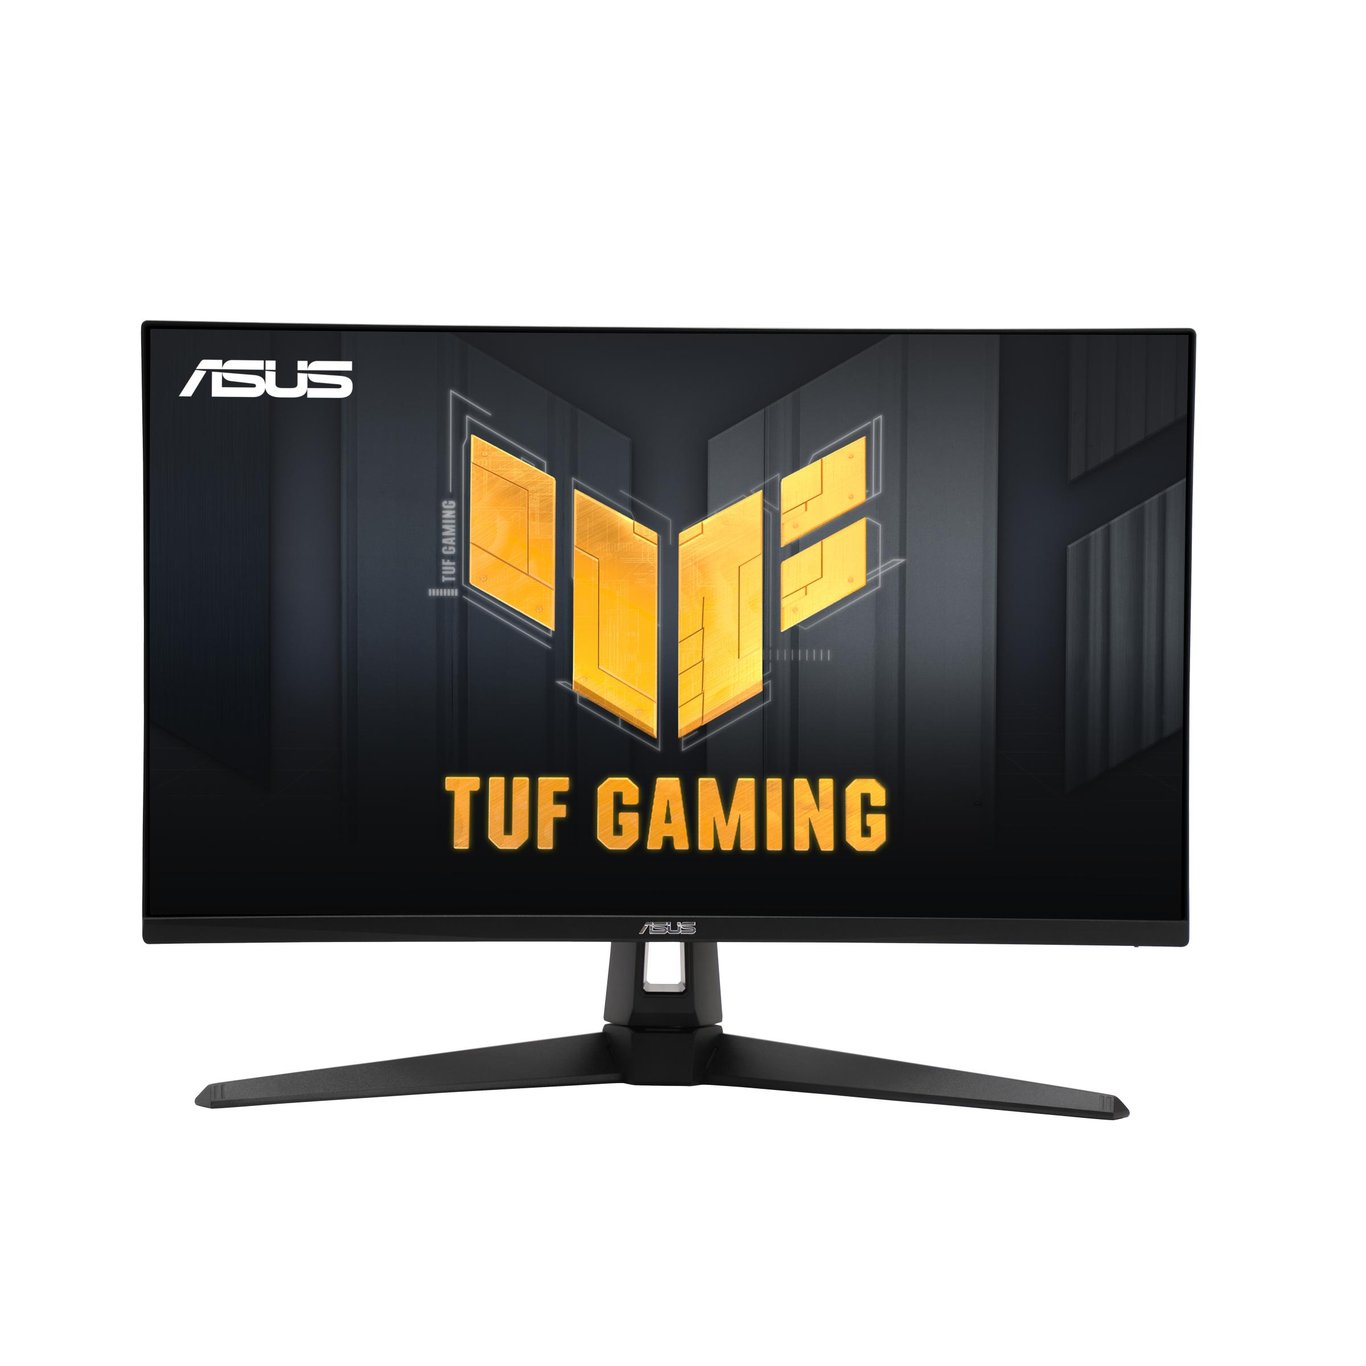 ASUS 華碩 TUF Gaming VG27AC1A 電競顯示器 (27 吋 WQHD 170Hz IPS HDR G-Sync Compatible) - 2560 x 1440